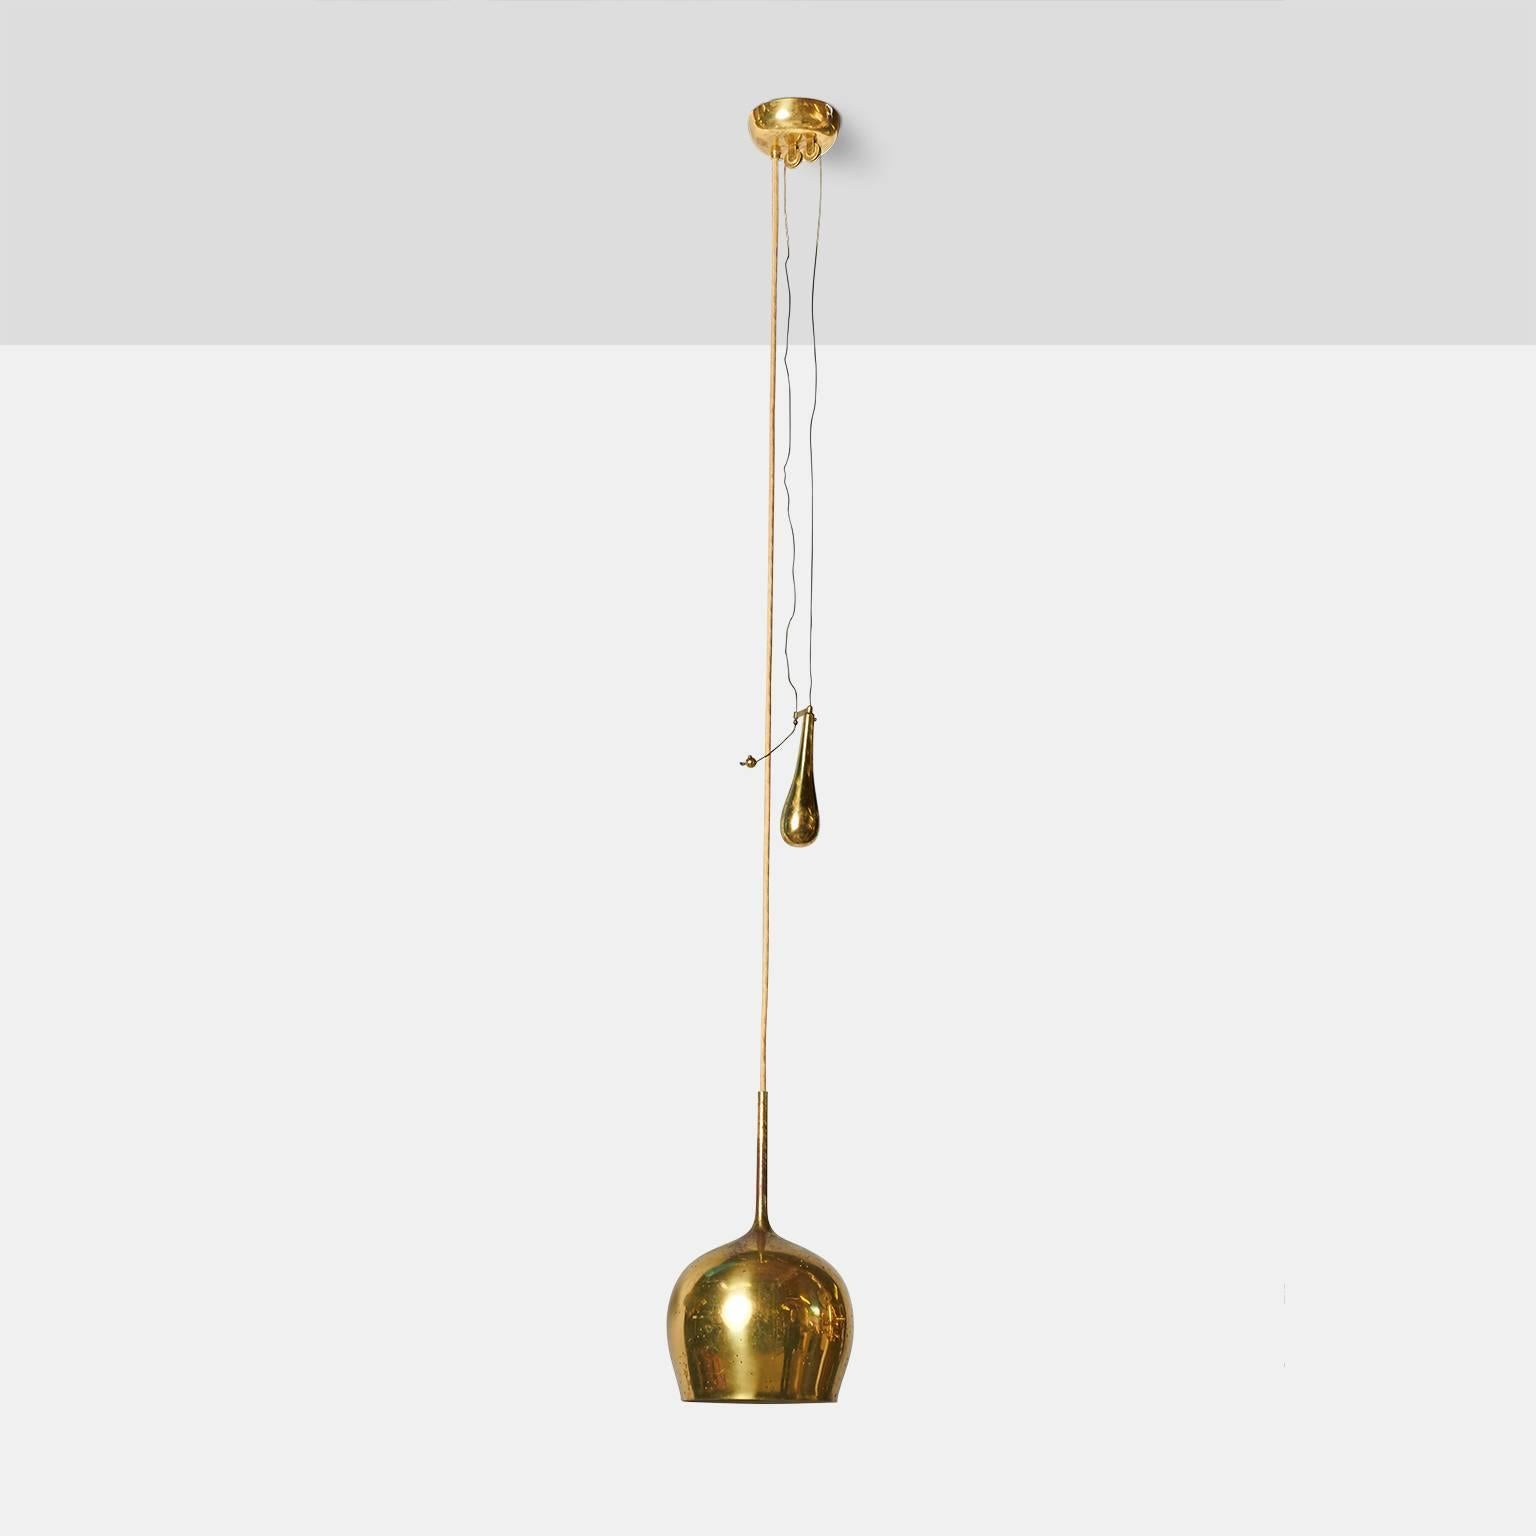 A counter weight pulley pendant by Paavo Tynell for Taito Oy with perforated brass shade and brass weight. Overall length can be adjusted.